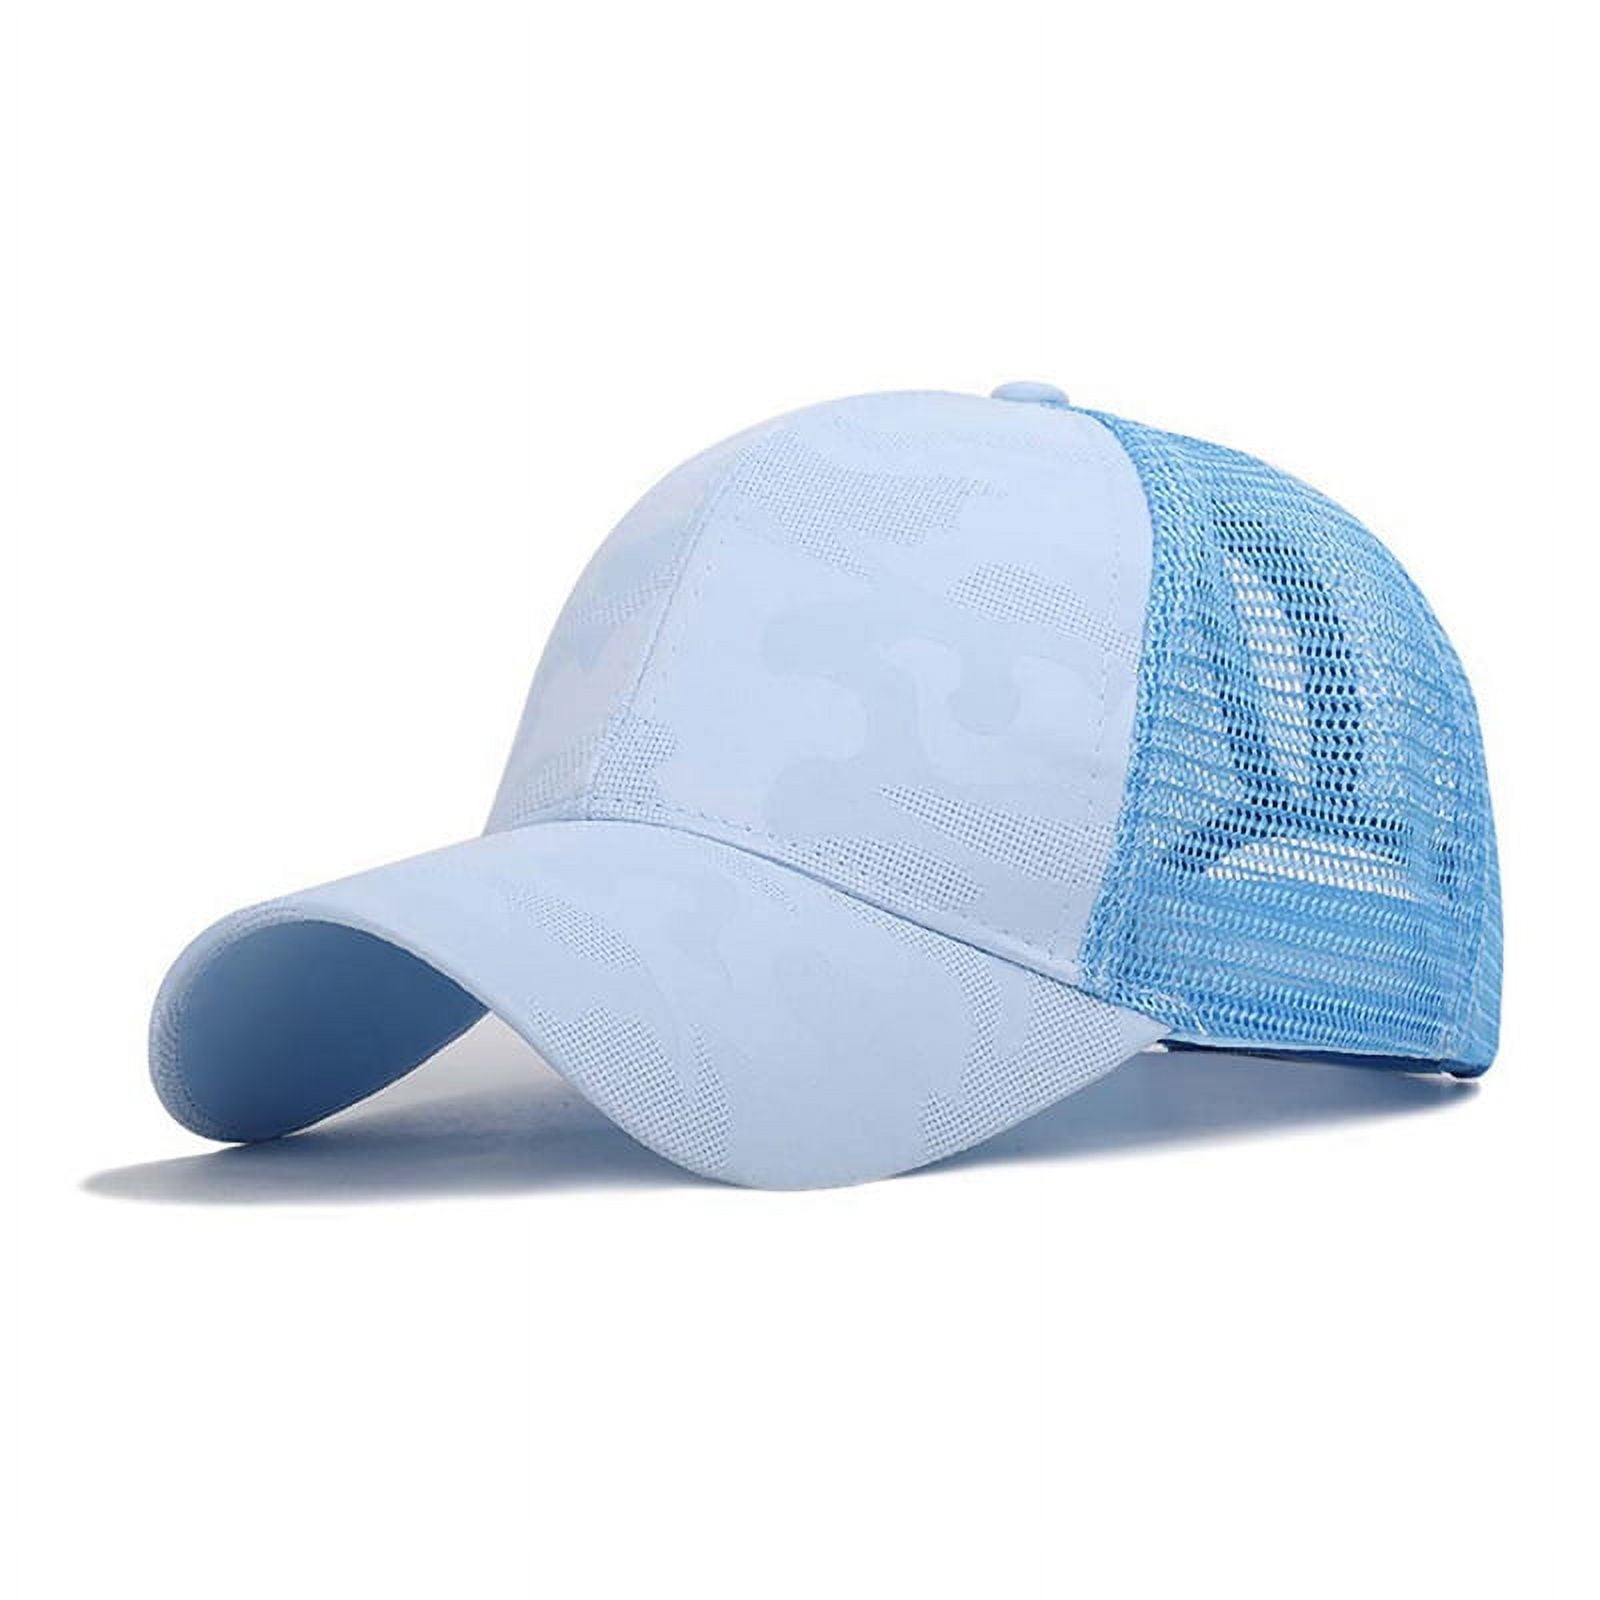 Unisex Running Ponytail Waterproof Snapback Hat Hat With Back Hole For  Headspace Marathon Adjustable Sun Cap For Women And Men From Fantasy1988,  $9.68